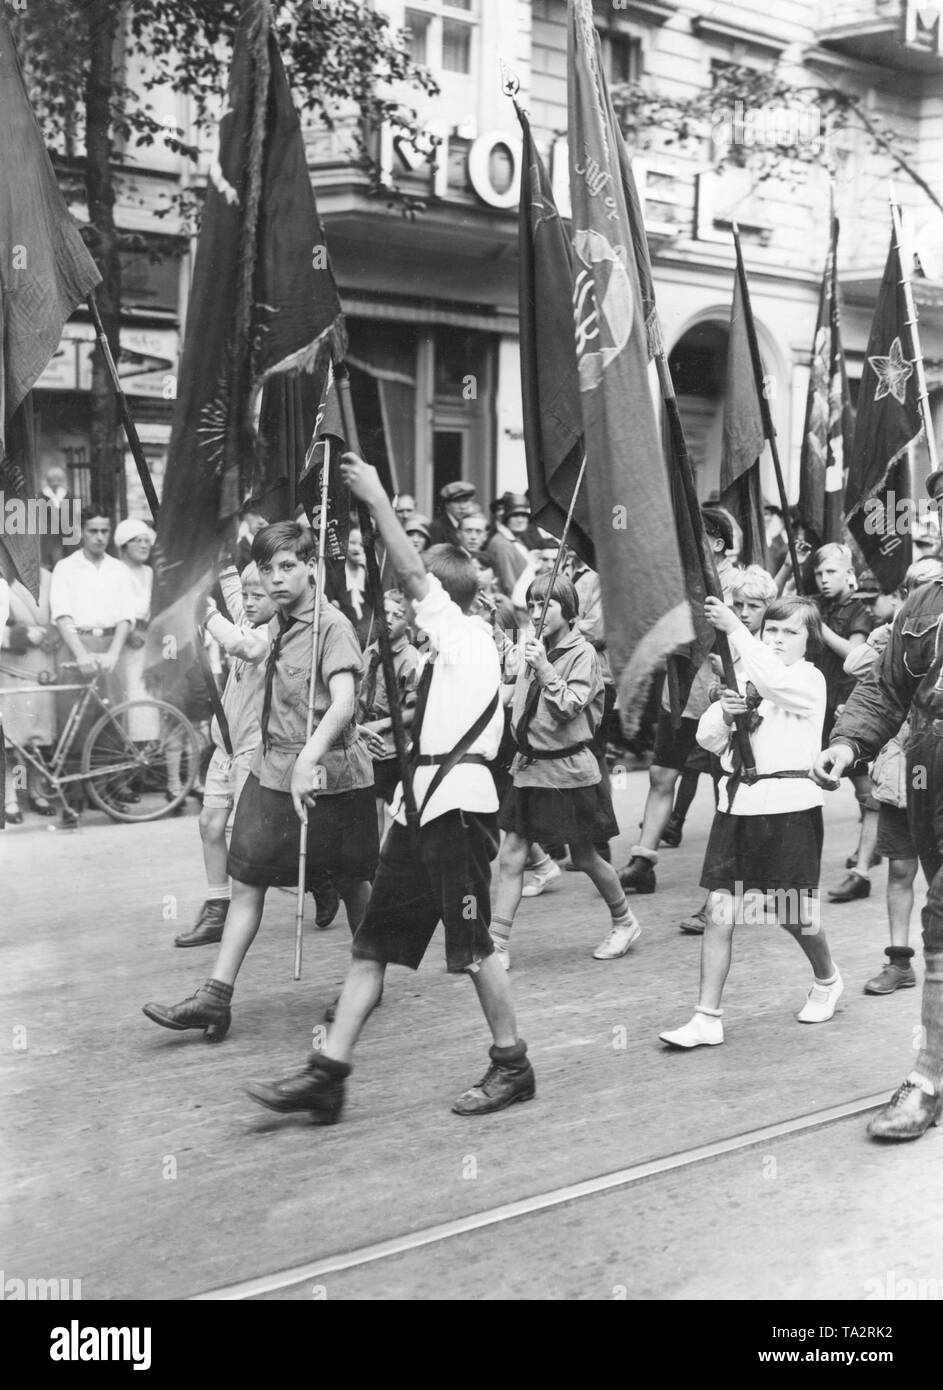 At the Second World Meeting of Workers' and Farmers' Children in the Sportpalast in Berlin, the participants of the Communist youth meeting organized a procession on the streets with flags of the cities and delegations (undated picture). Stock Photo